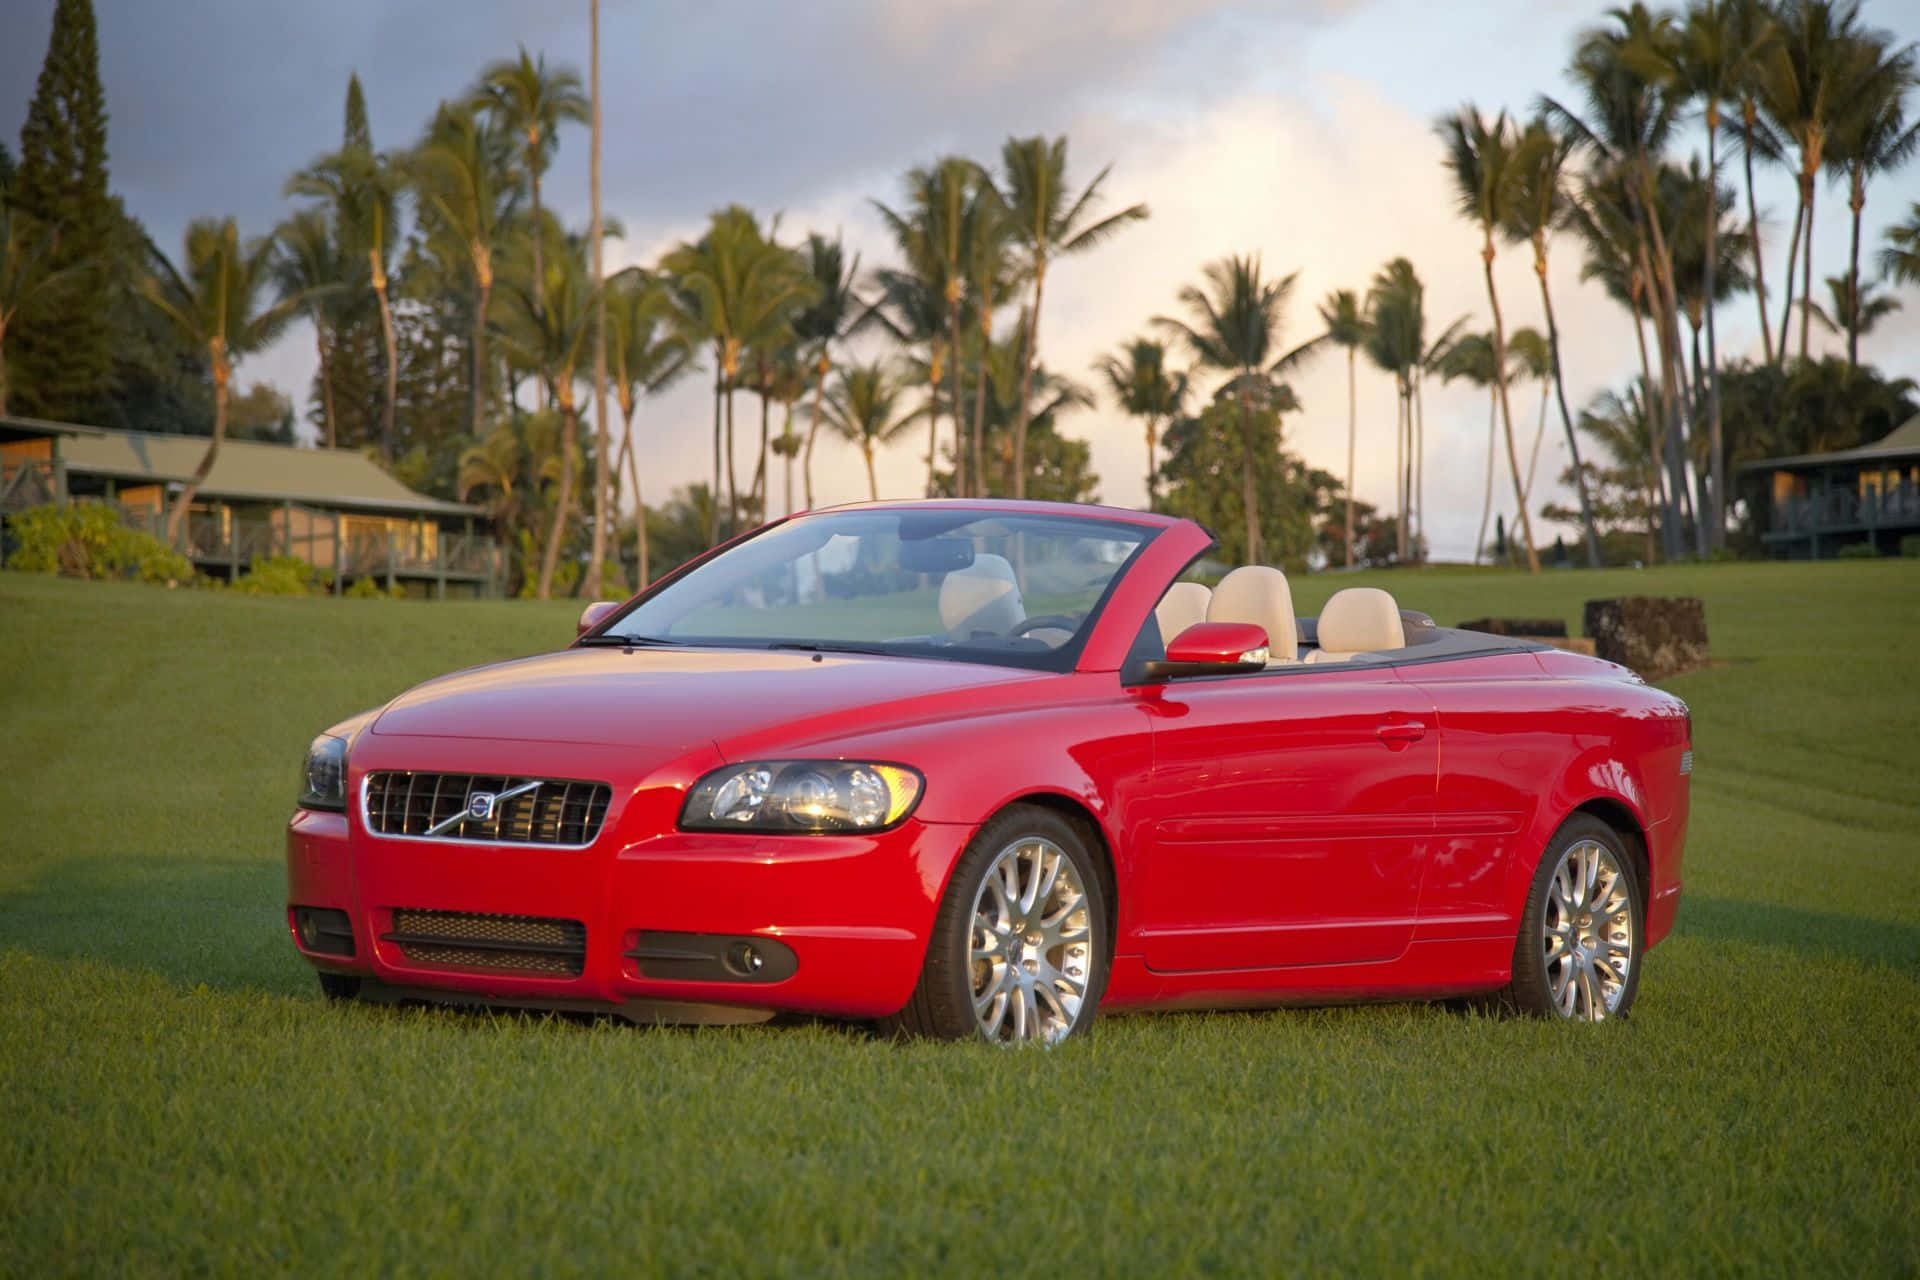 Caption: The Sleek And Elegant Volvo C70 In Action Wallpaper